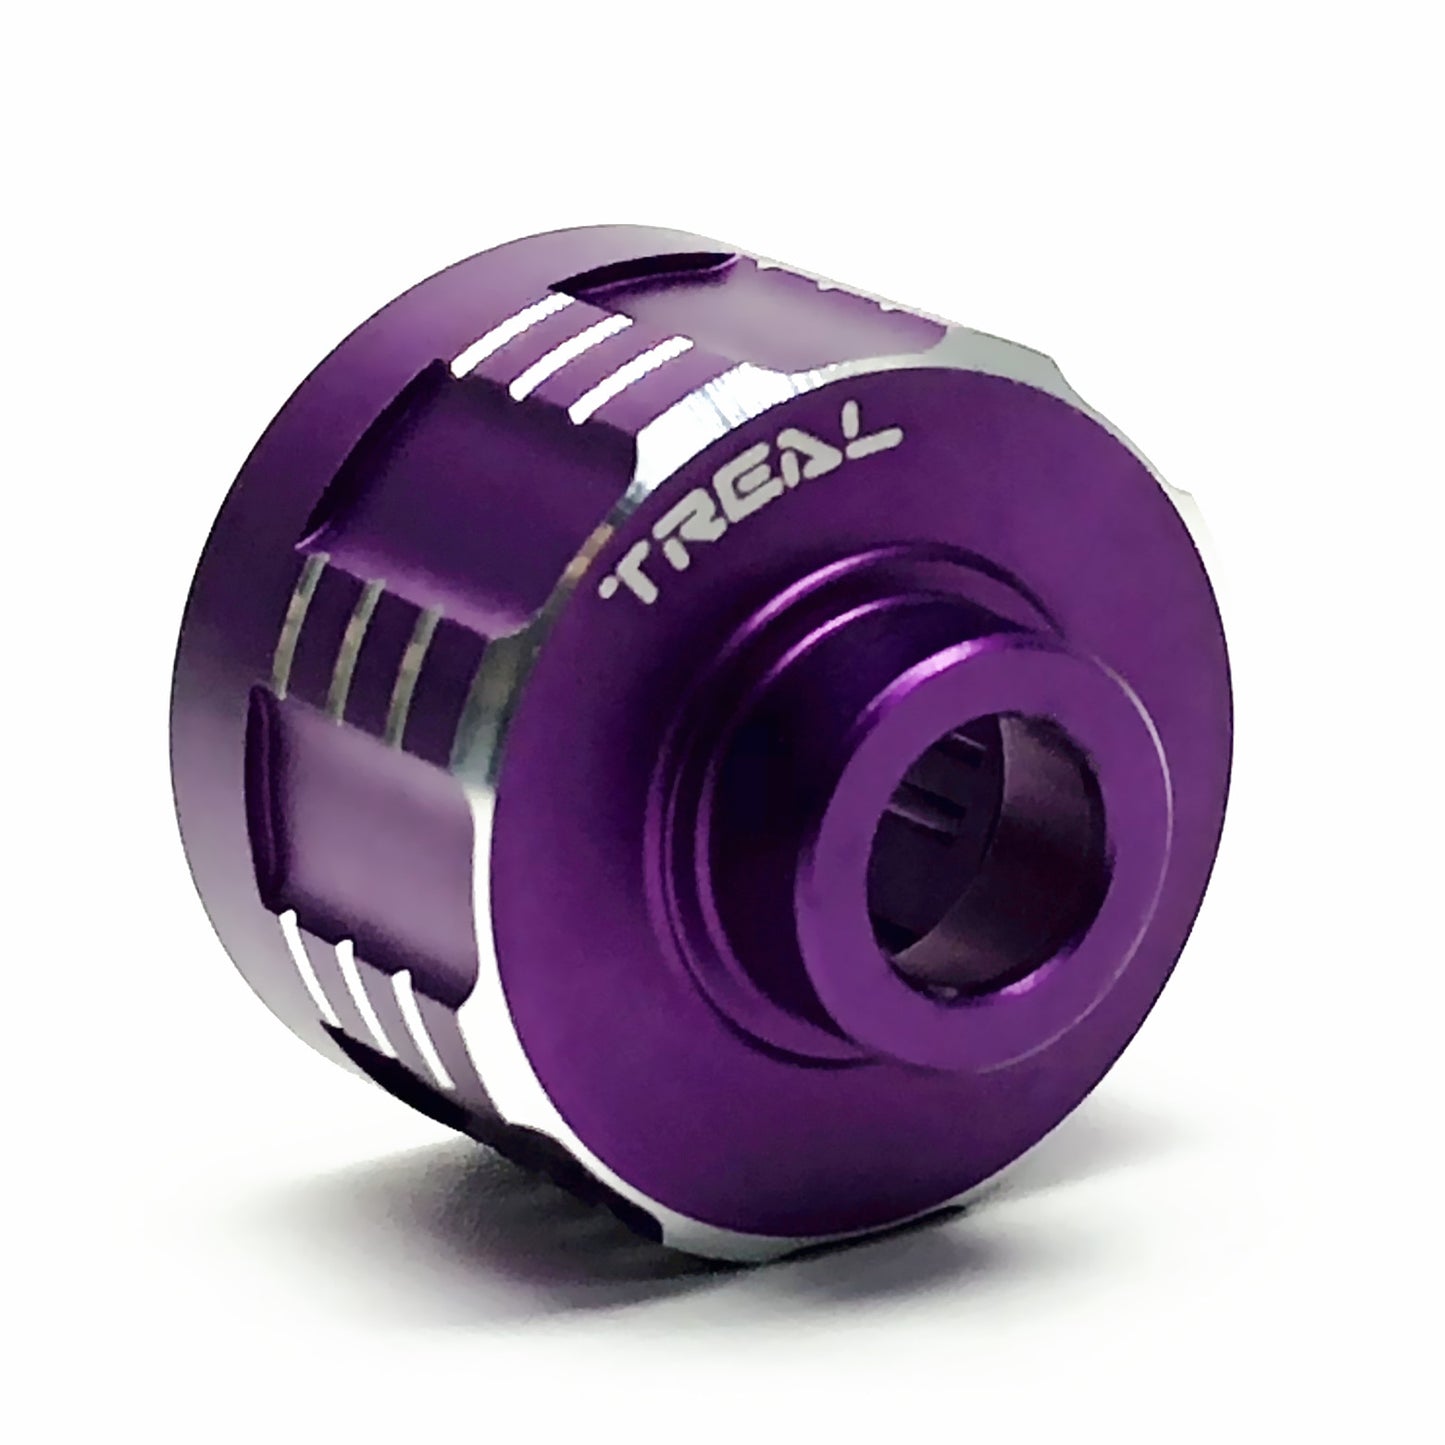 Treal Aluminum 7075 Diff Housing Cup for Axial Ryft